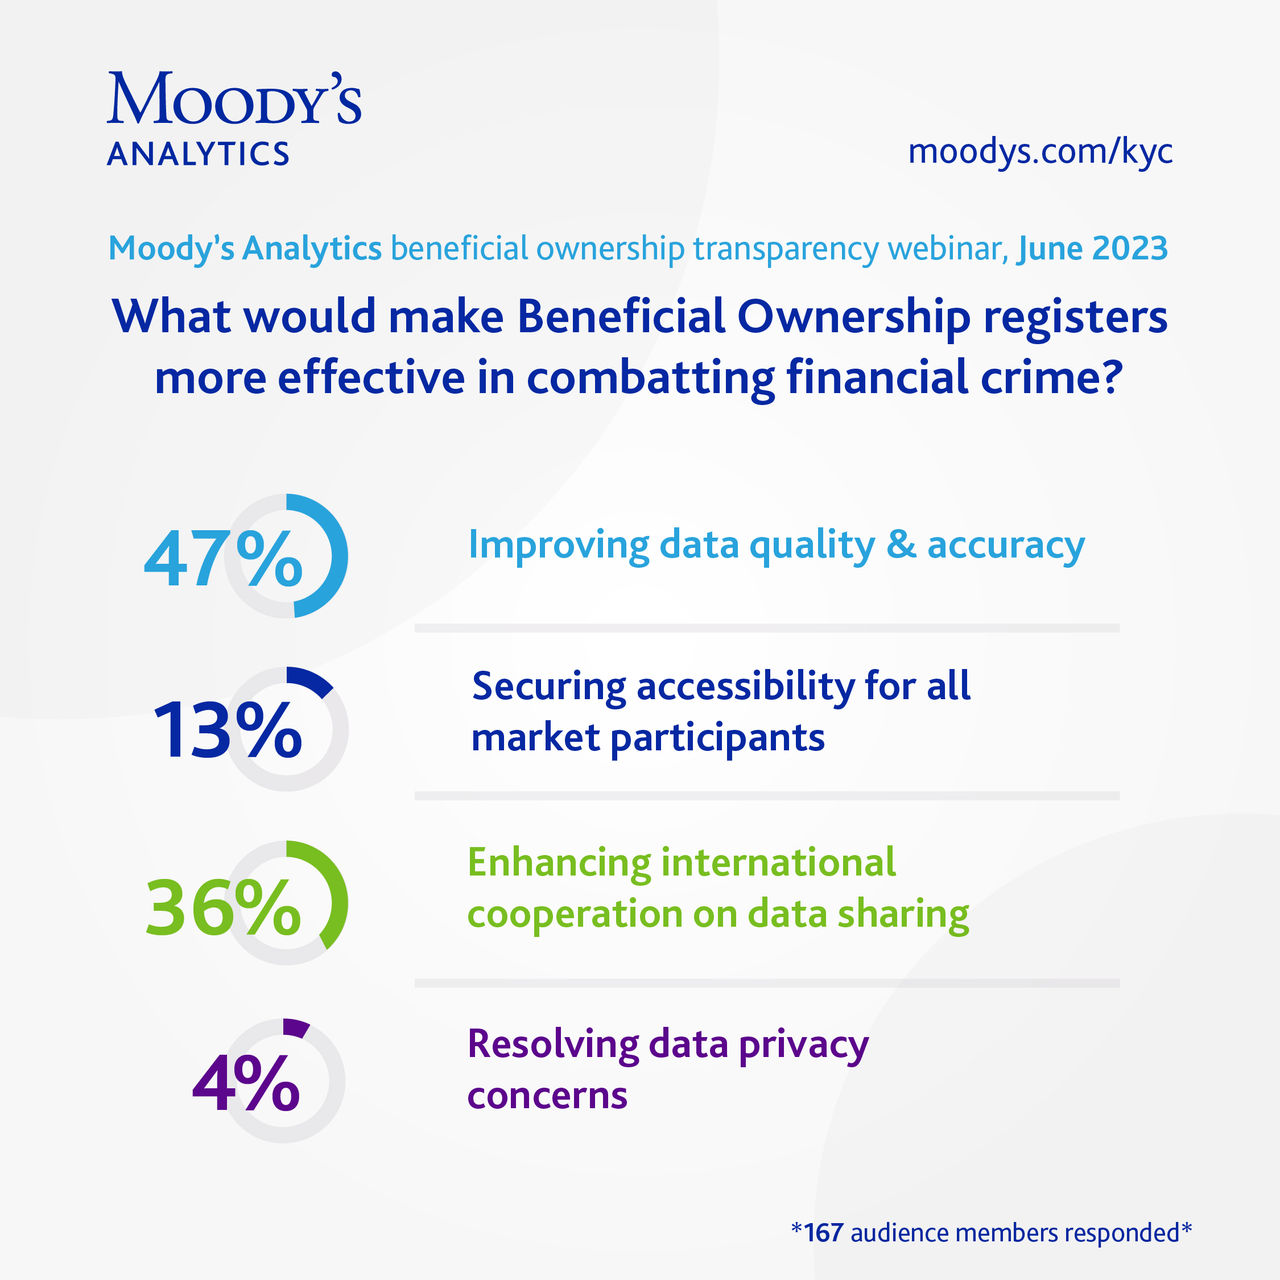 What would make Beneficial Ownership registers more effective in combatting financial crime?